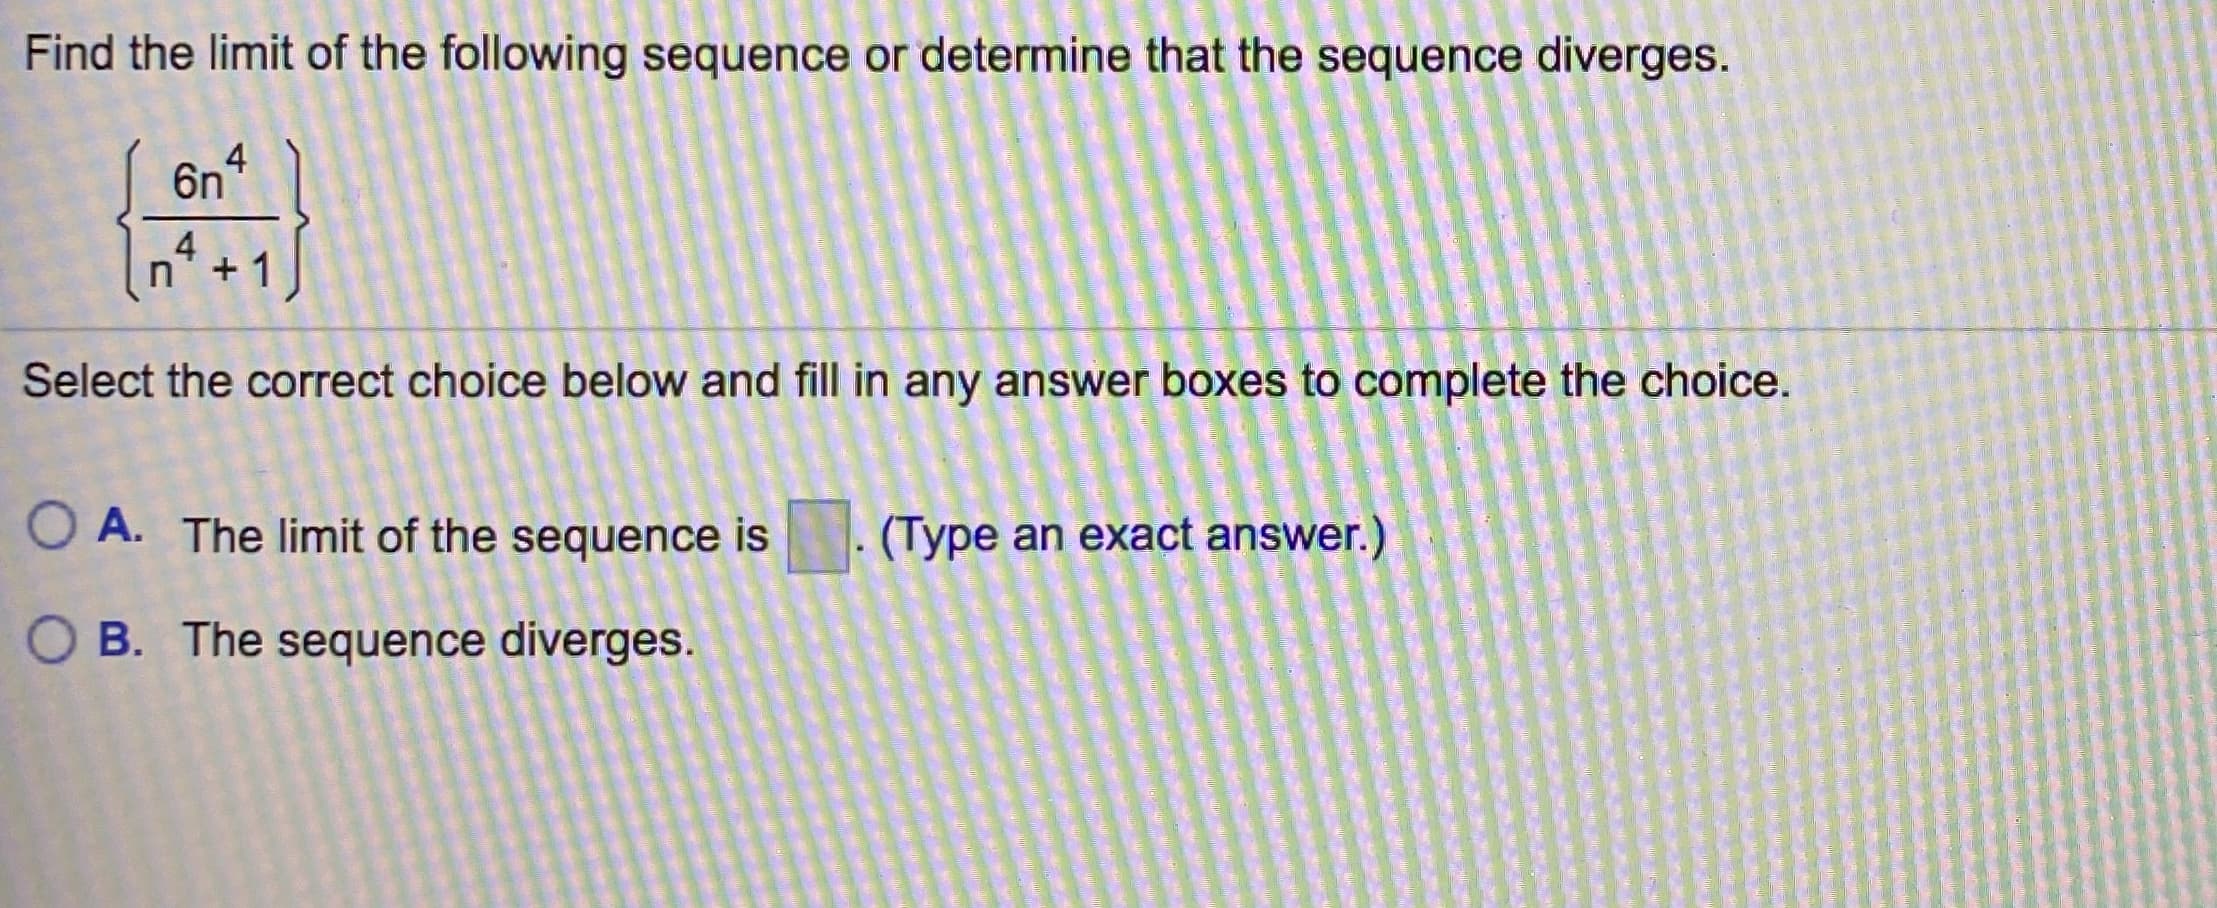 Find the limit of the following sequence or determine that the sequence diverges.
4
6n
4.
+1
Select the correct choice below and fill in any answer boxes to complete the choice.
O A. The limit of the sequence is
(Type an exact answer.)
